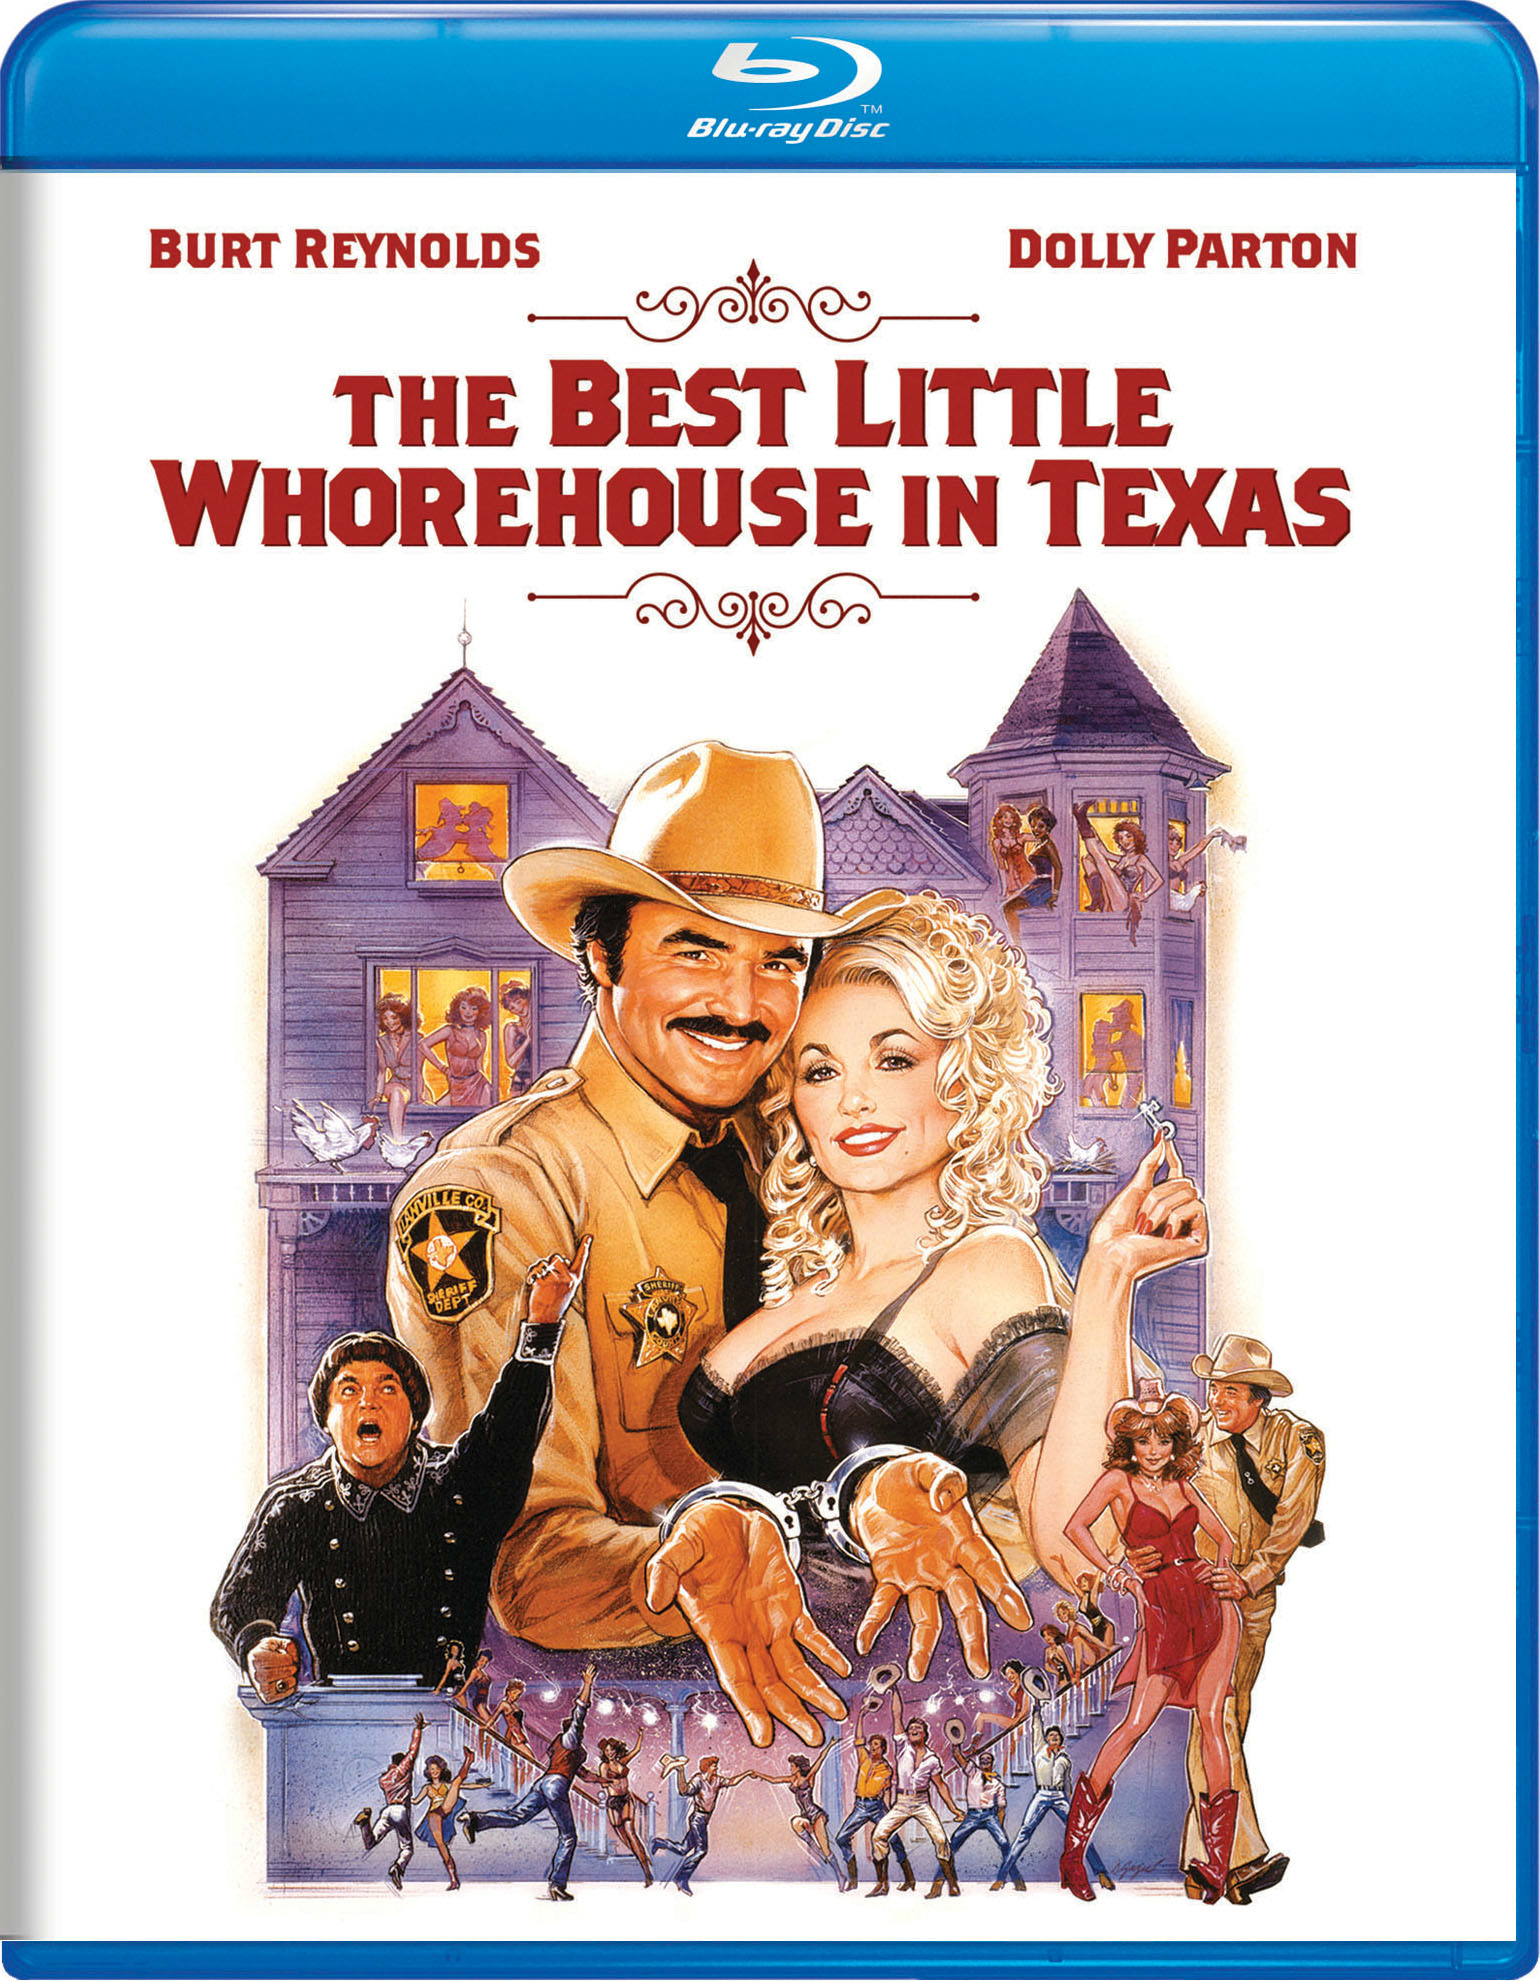 The Best Little Whorehouse In Texas - Blu-ray [ 1982 ]  - Musical Movies On Blu-ray - Movies On GRUV